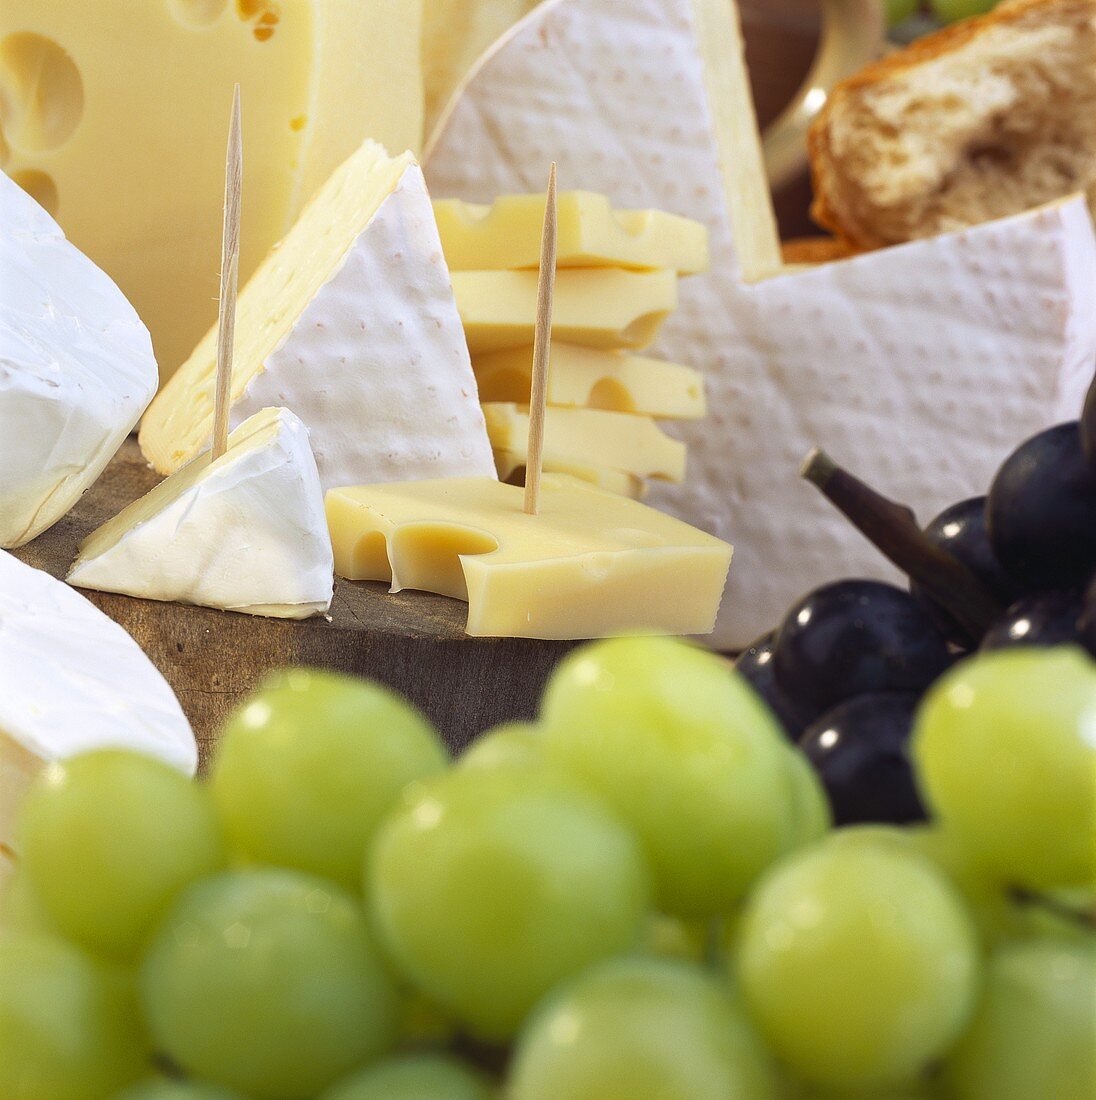 French bio-cheese with grapes